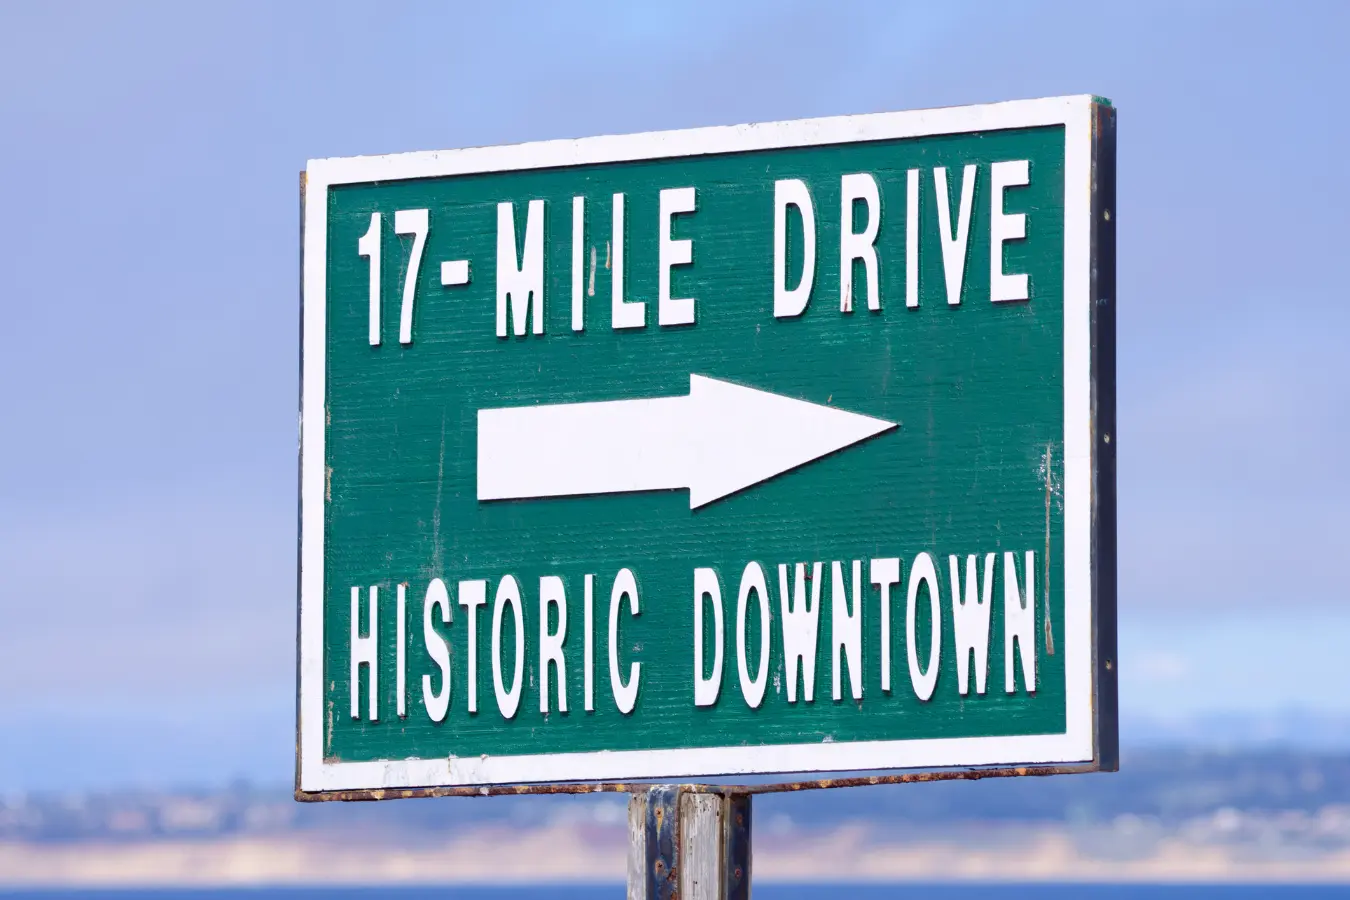 17 mile historic downtown